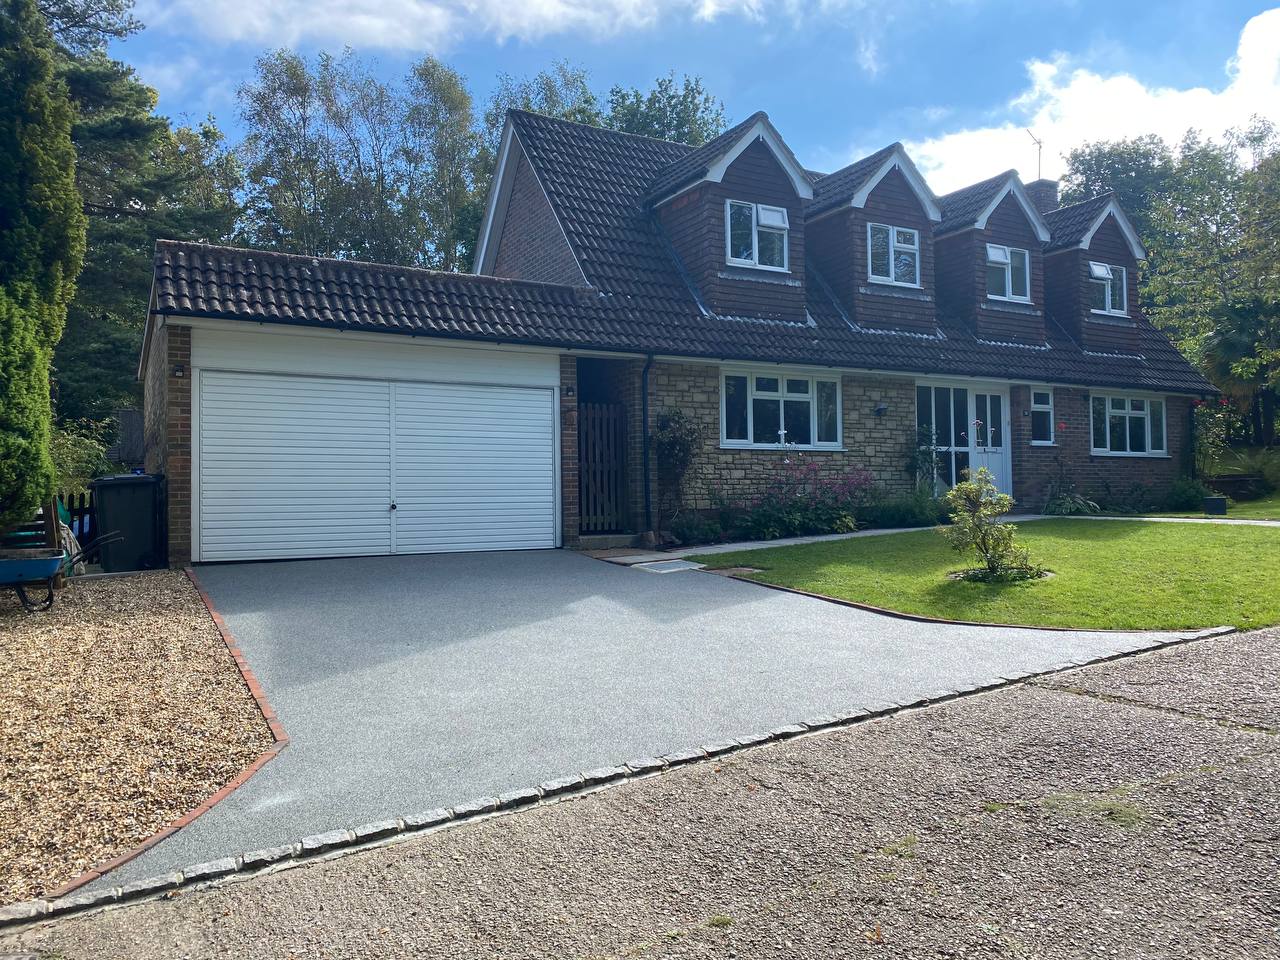 This is a photo of a resin driveway installed in Stoke-On-Trent by Stoke-On-Trent Resin Driveways